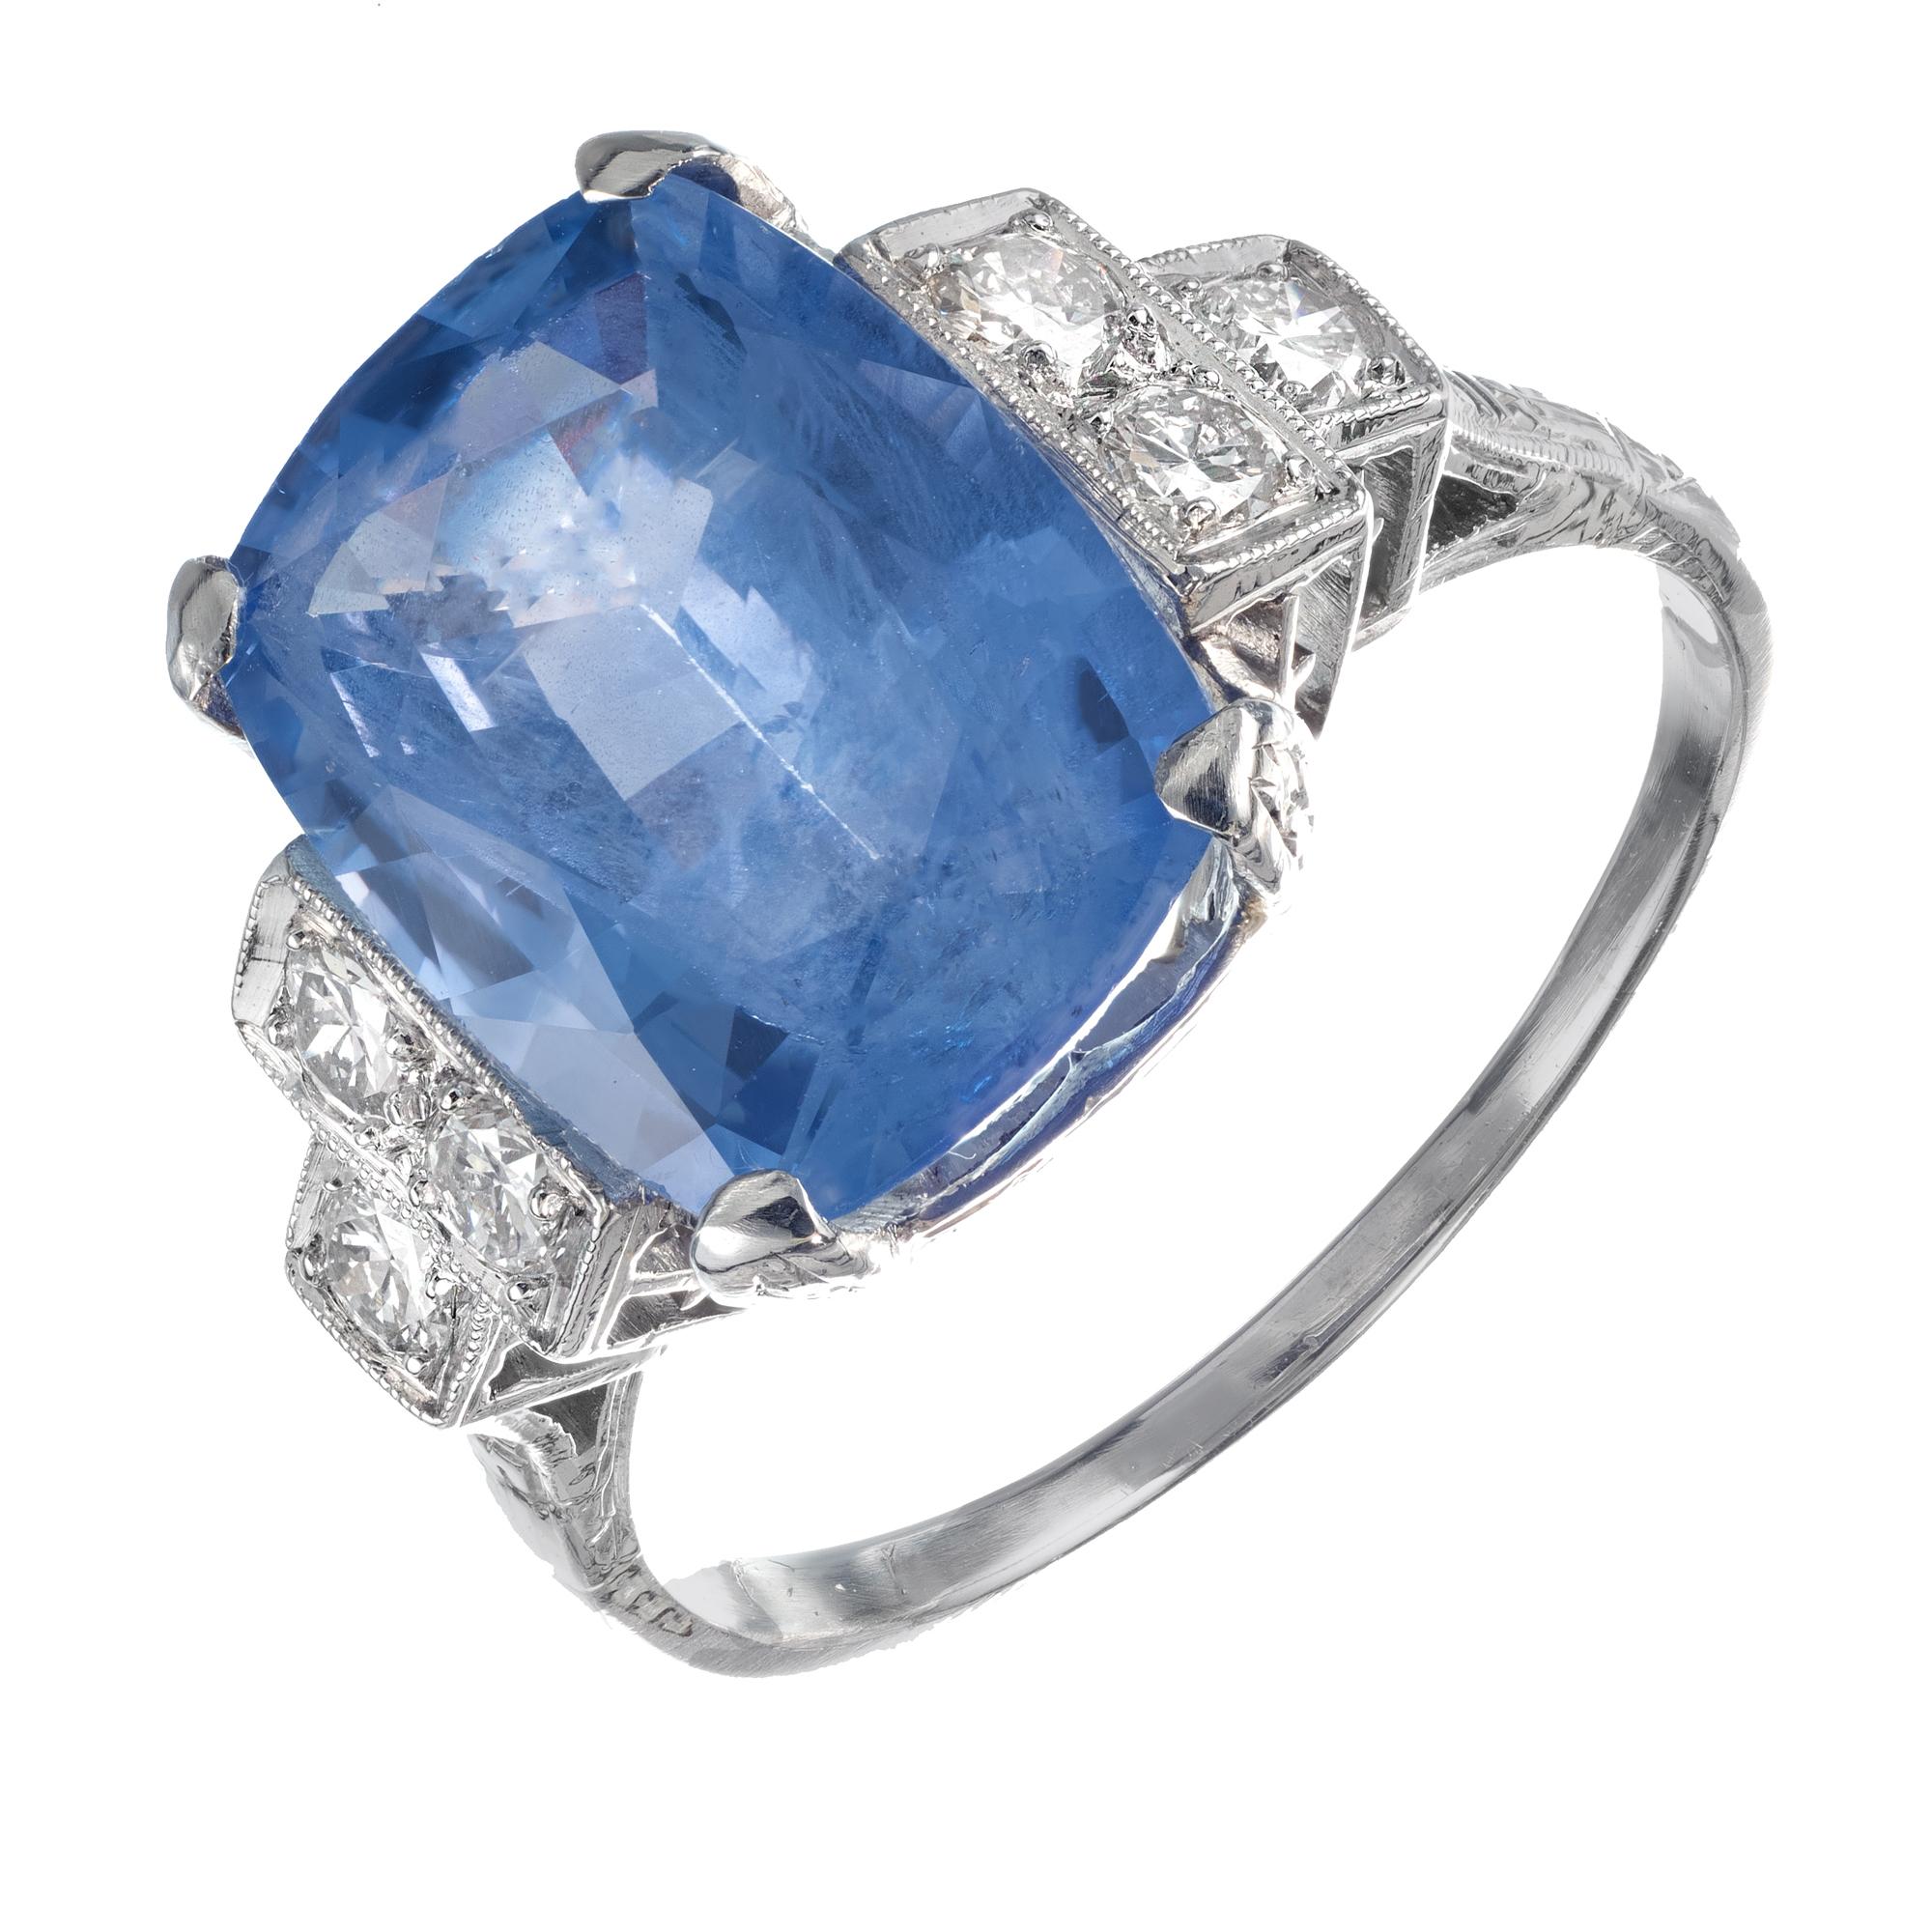 Original 1930's sapphire and diamond engagement ring. The center is set with a medium blue simple heat only sapphire. GIA certified from Sri Lanka. Platinum setting with 6 round accent diamonds. 

1 cushion shape light blue I sapphire, Approximate